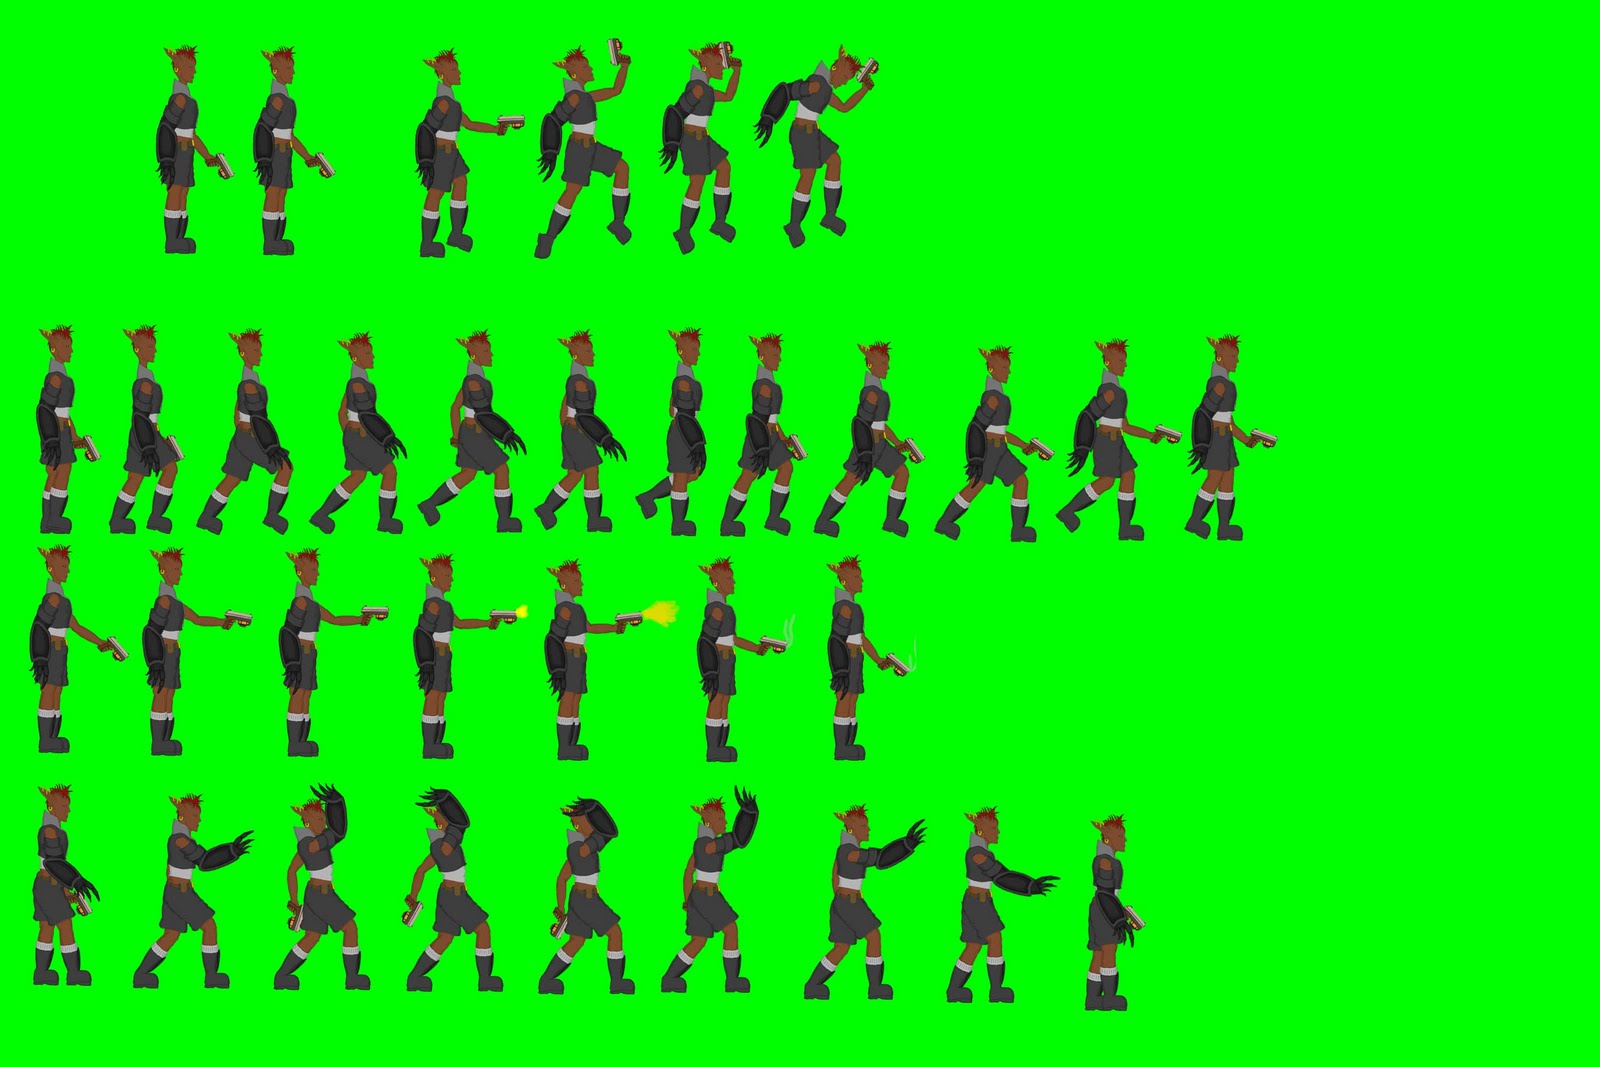 sprite sheet character